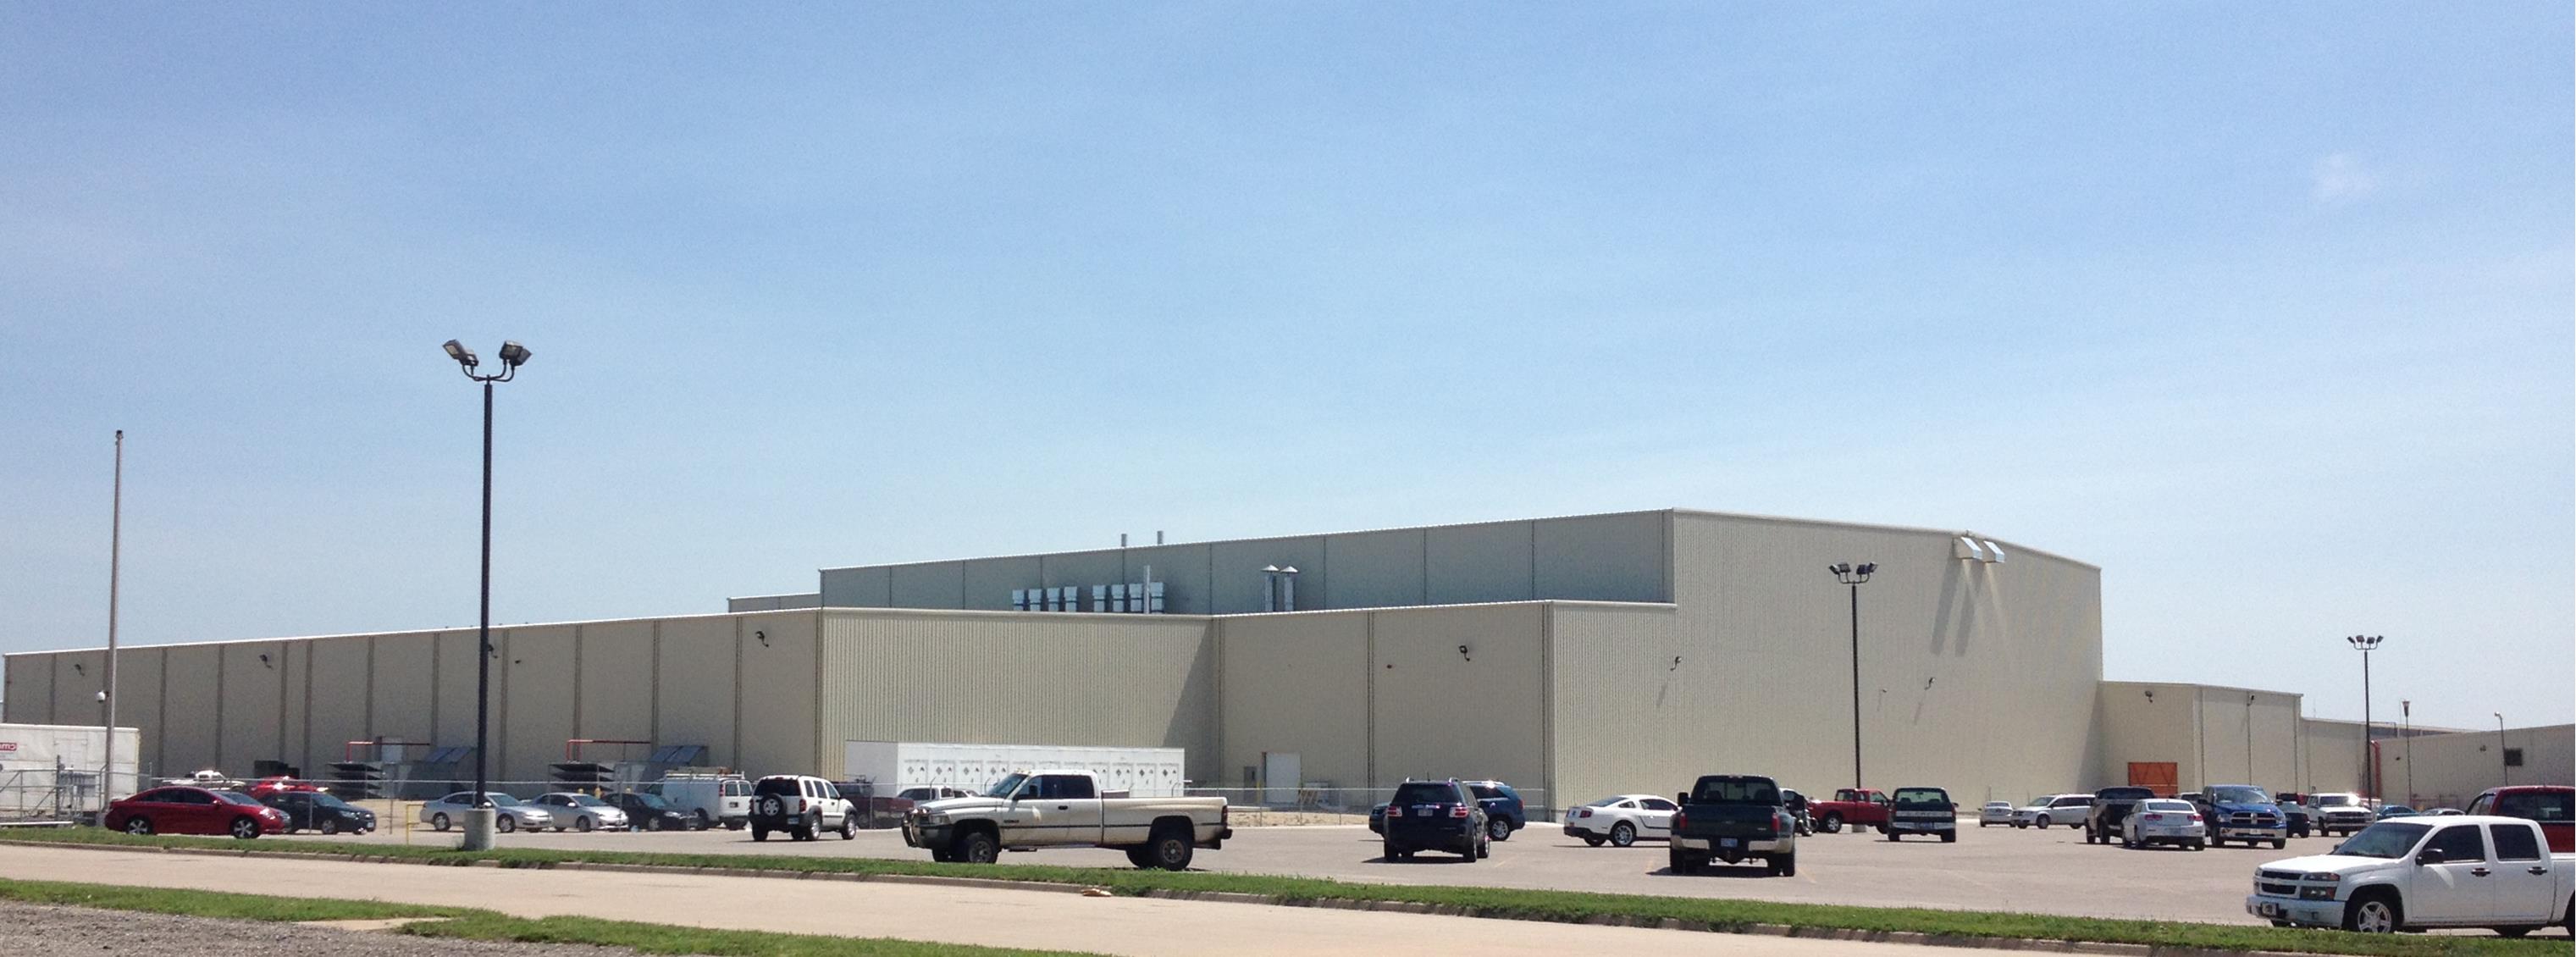 AGCO's new state-of-the-art paint facility, opened July 2013. As the county's largest manufacturer and one of the region's largest employers, they provide jobs to over 1480 individuals.